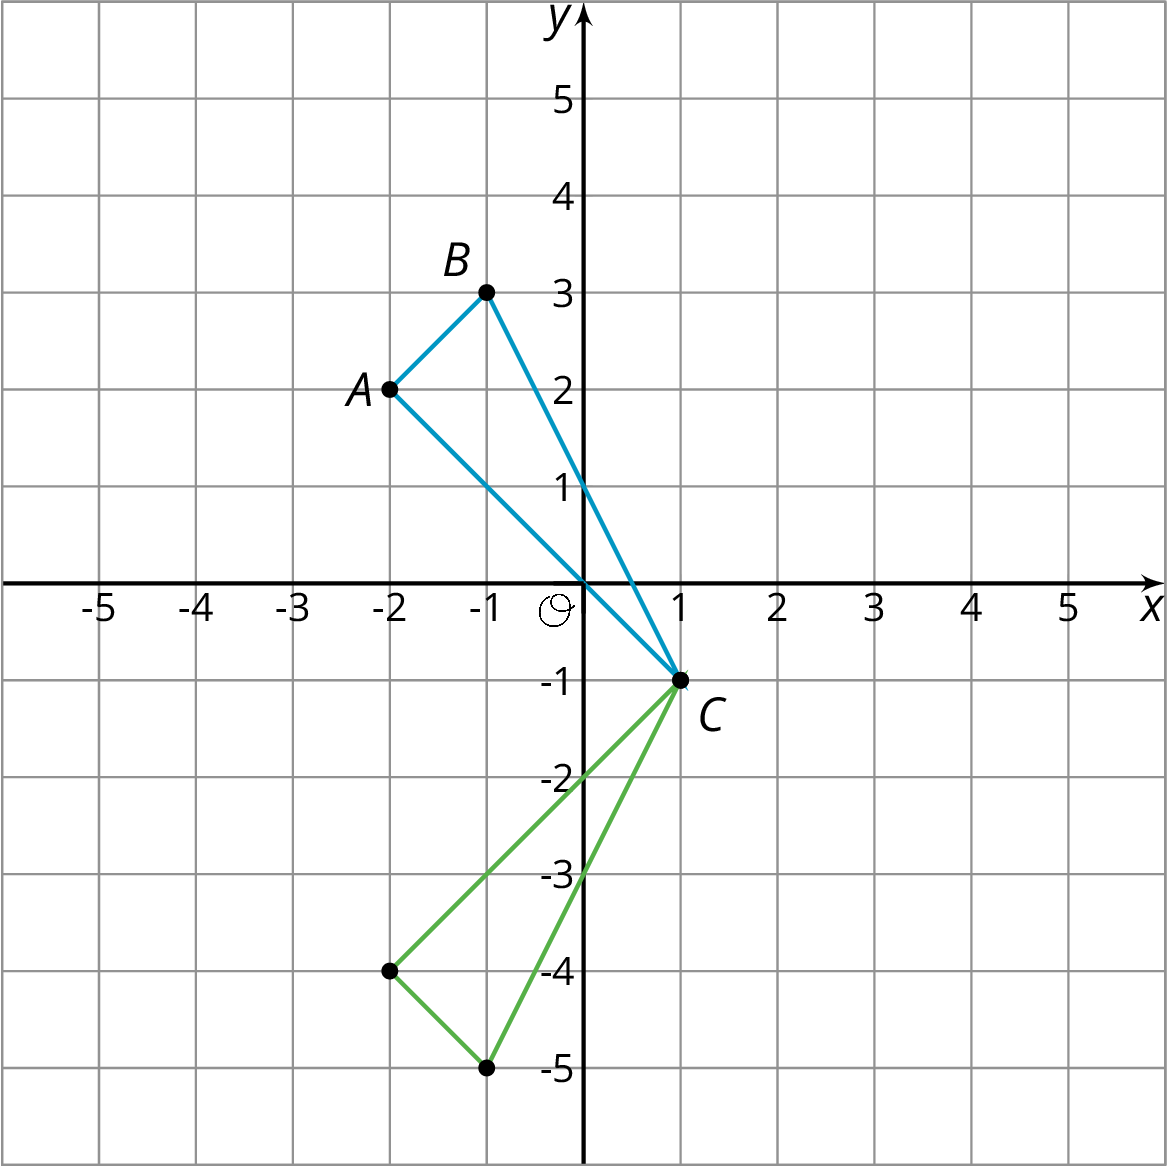 Triangle A B C on the x y plane with the origin labeled O. The numbers negative 5 through 5 appear on both the x axis and the y axis. Point A has the coordinates negative 2 comma 2. Point B has the coordinates negative 1 comma 3. Point C has the coordinates 1 comma negative 1.  A second triangle is drawn on the x y plane and shares the point C. The second triangle has the points with following coordinates: 1 comma negative 1, negative 1 comma negative 5, and negative 2 comma negative 4. 